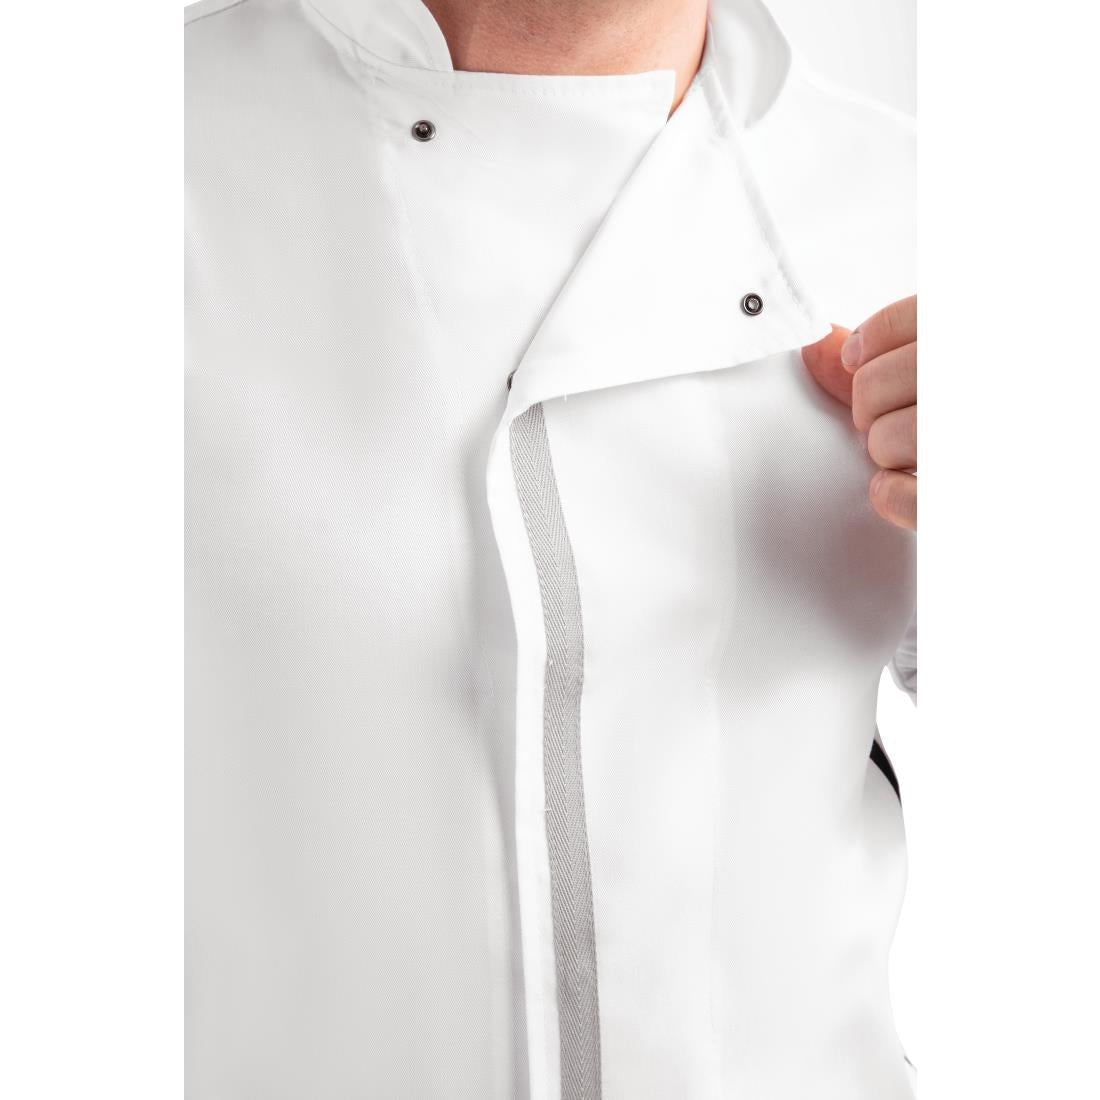 B998-XS Southside Unisex Chefs Jacket Short Sleeve White XS JD Catering Equipment Solutions Ltd